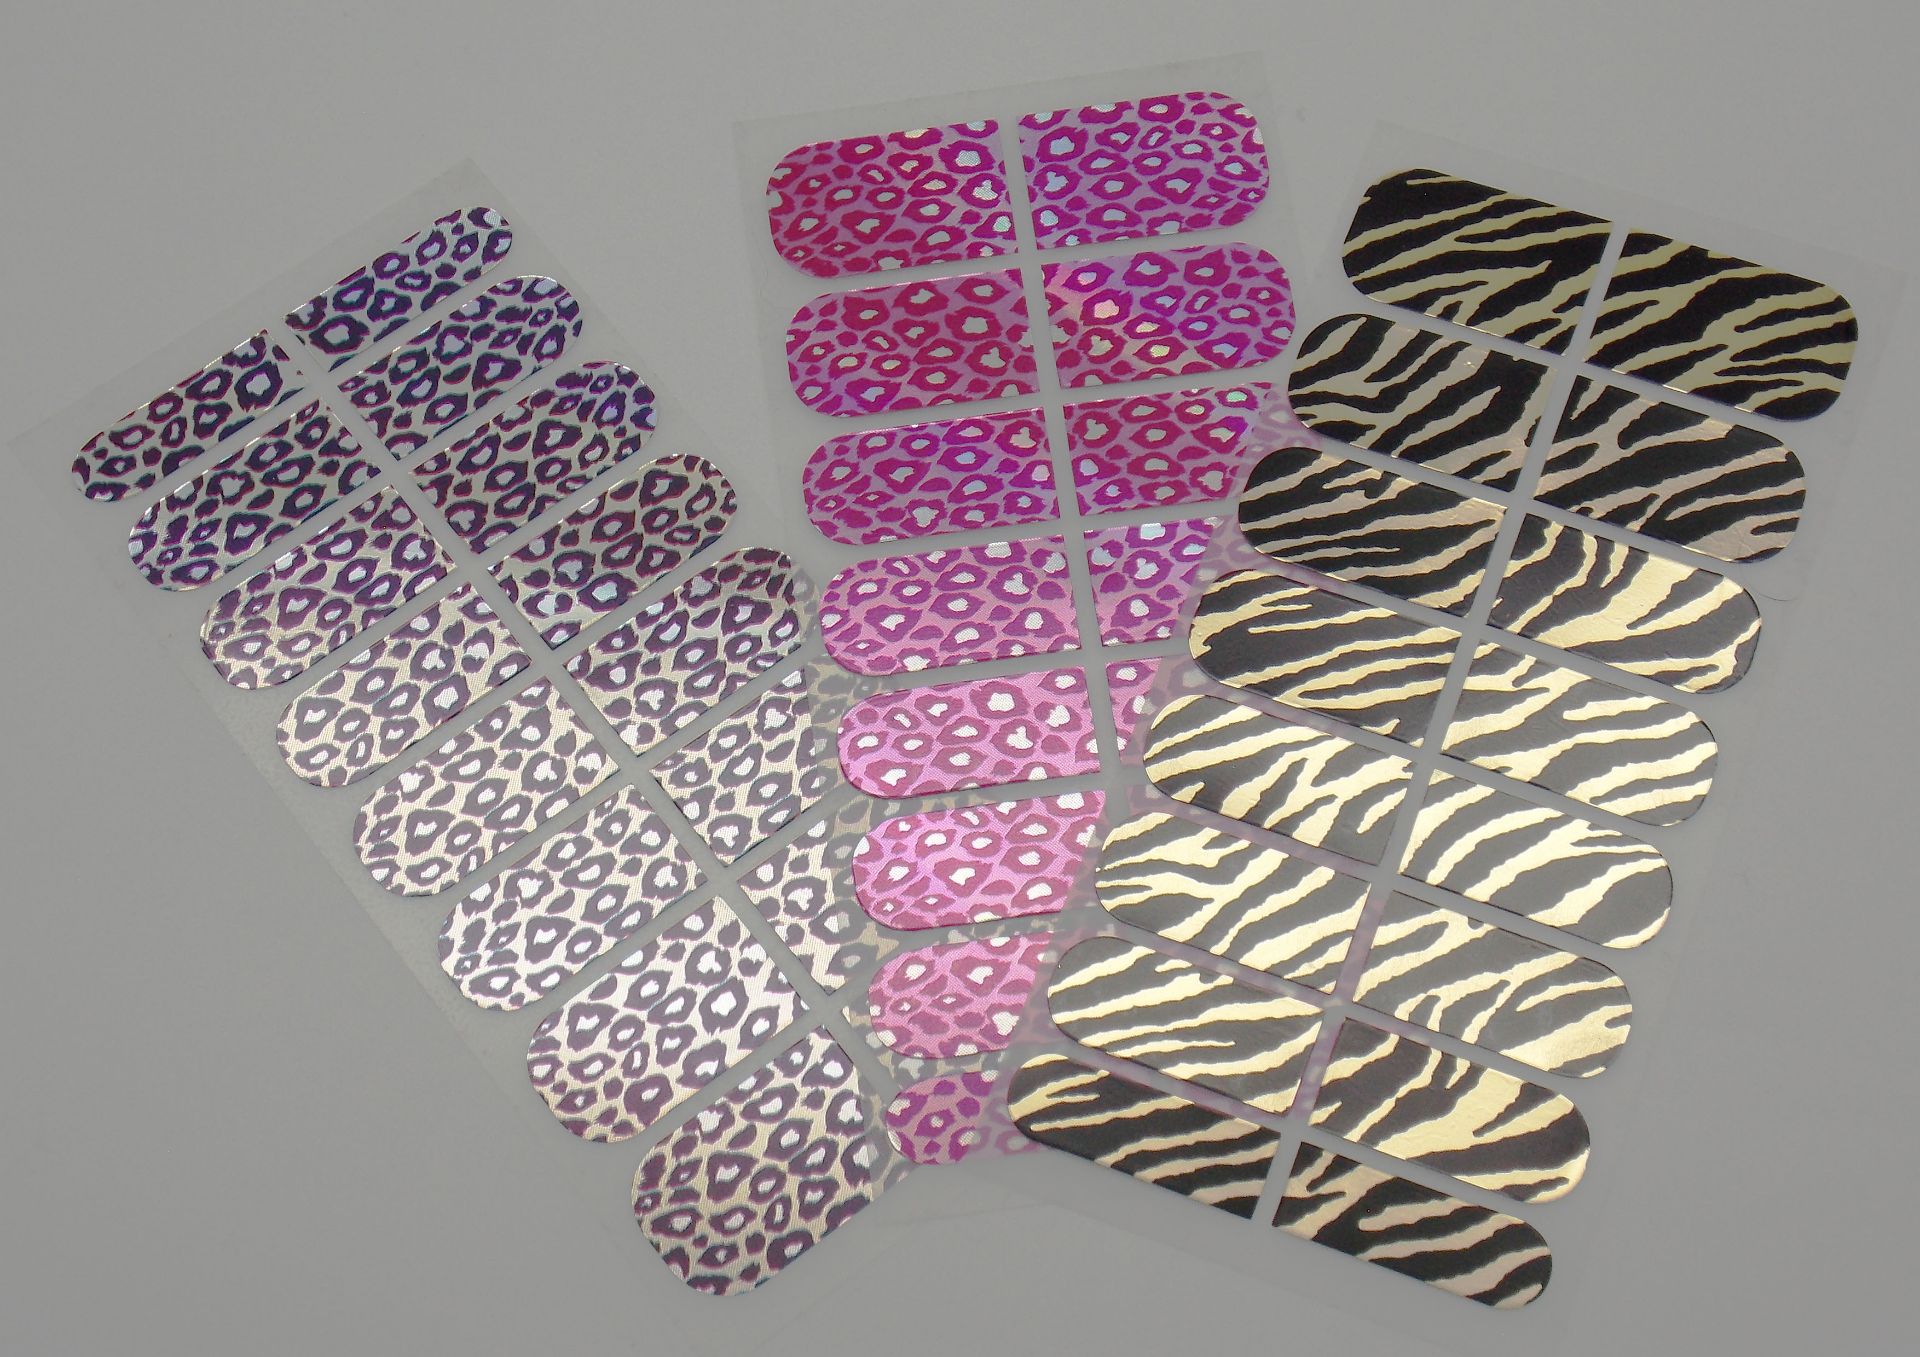 144 Packs Of Professional Nail Art Wrap Transfers - 3 Different Animal Print Styles - Image 6 of 10